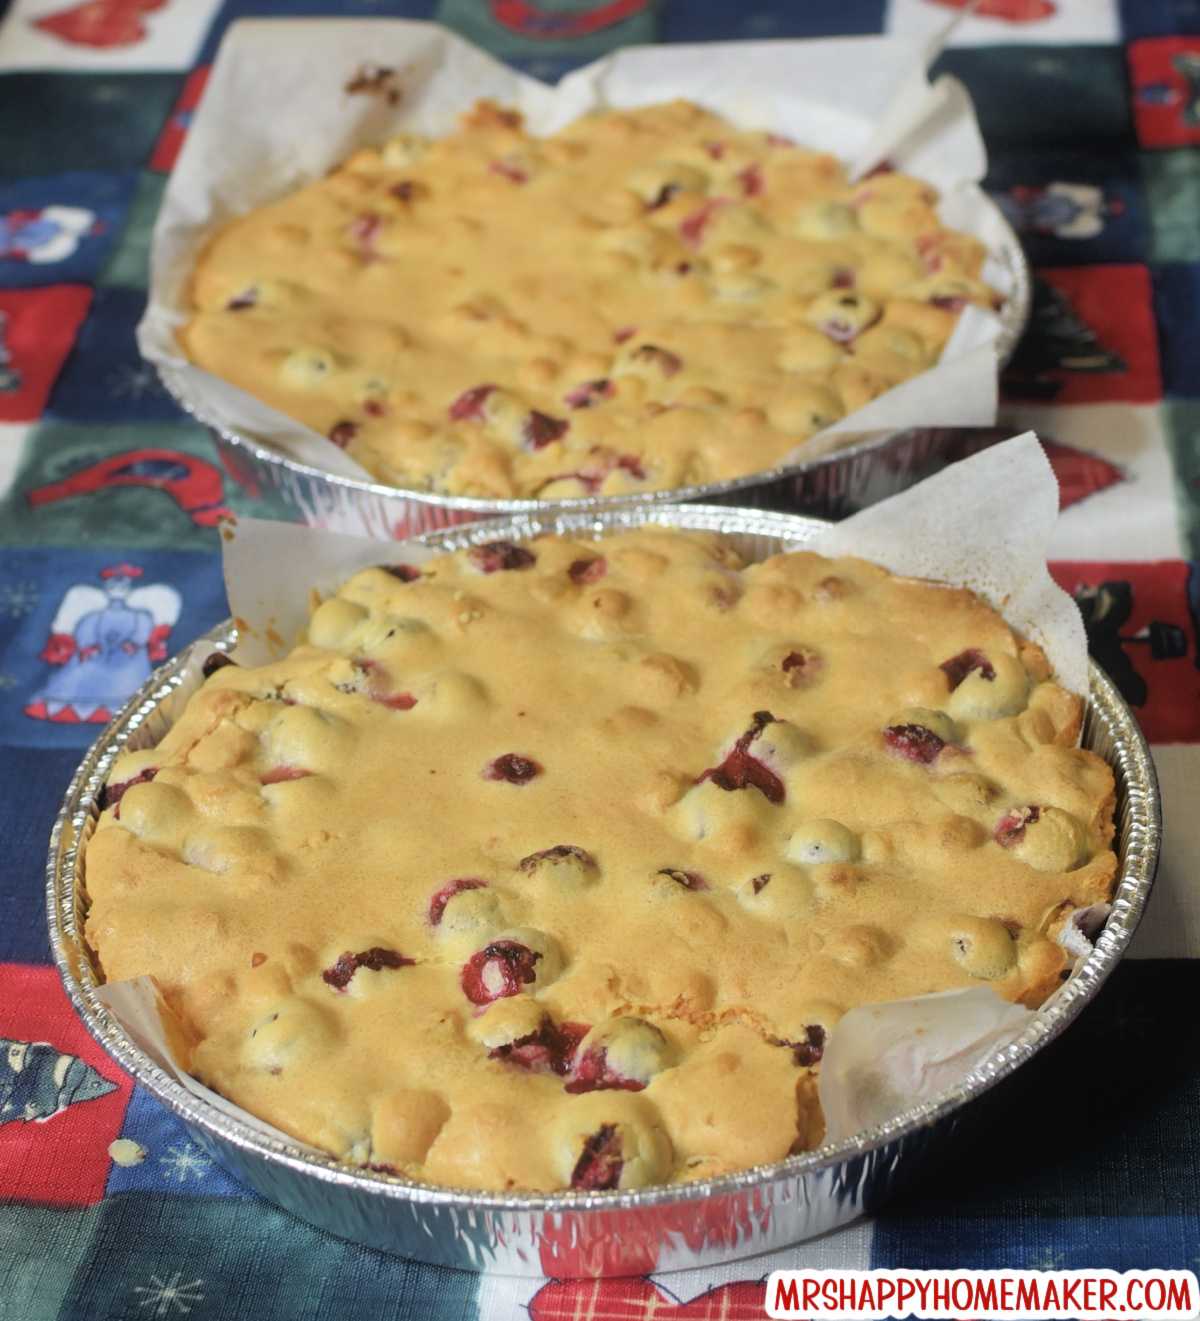 Cranberry Christmas Cake in two round aluminum pans that are lined with parchment paper, set on a holiday tablecloth 